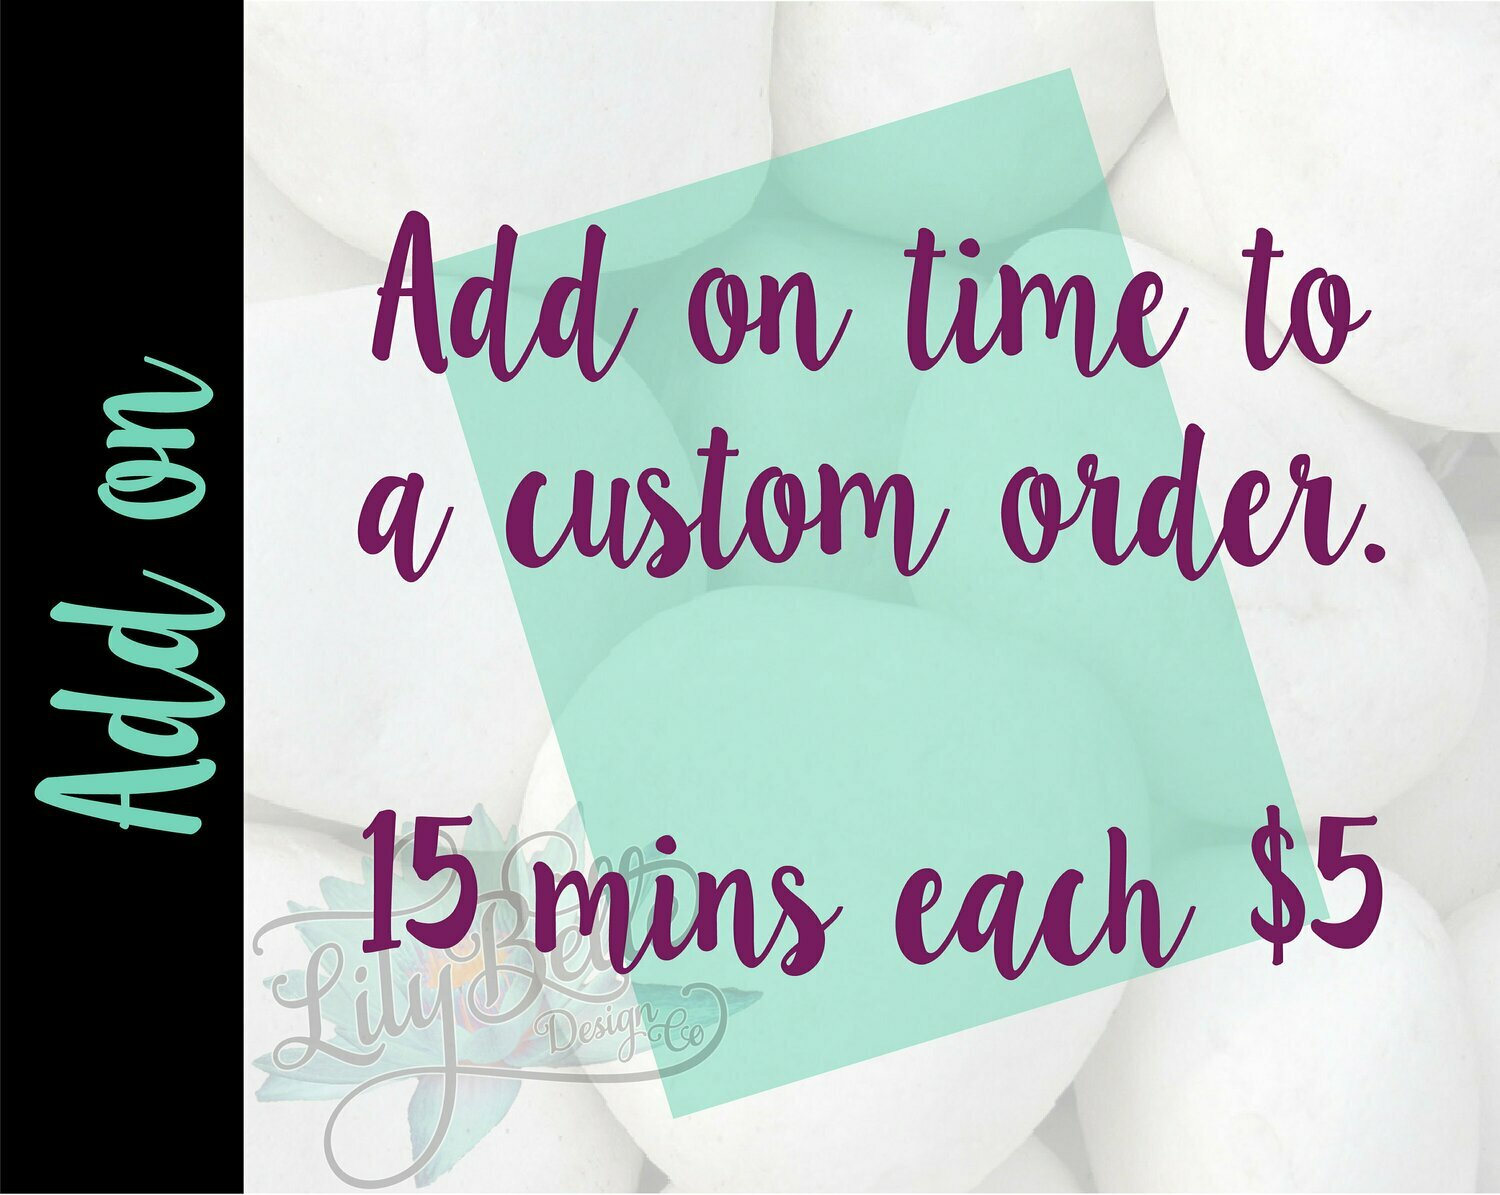 15 Mins of add on time to a custom order.